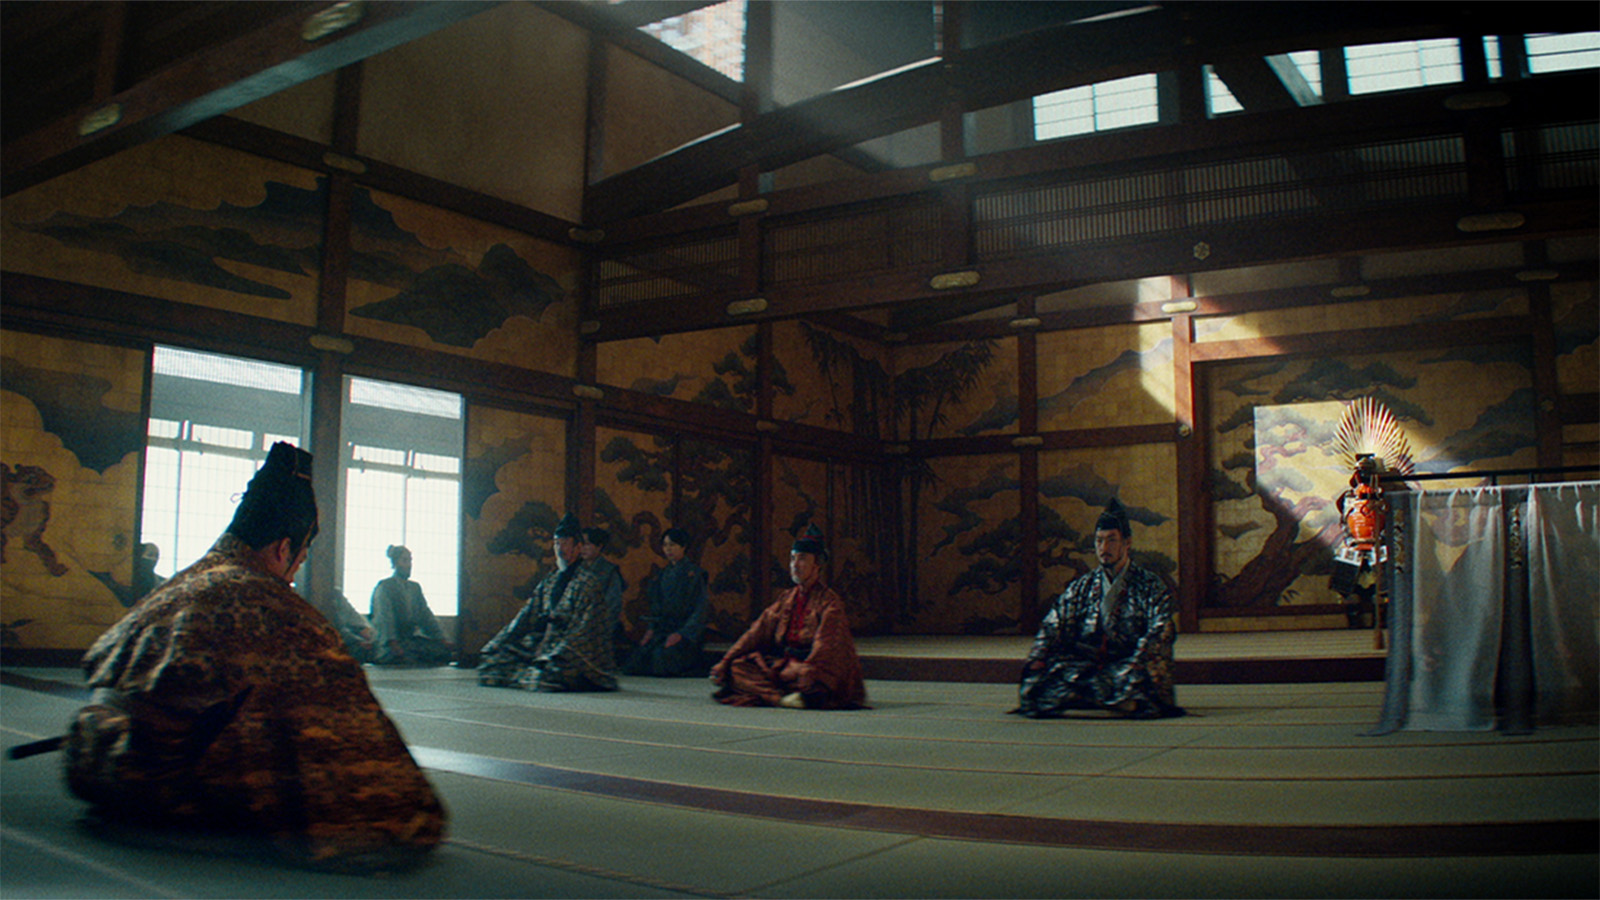 Shogun shows a rare kind of authenticity that isn’t present in most major television shows. The attention to detail is immediately apparent in every episode. Image © FX